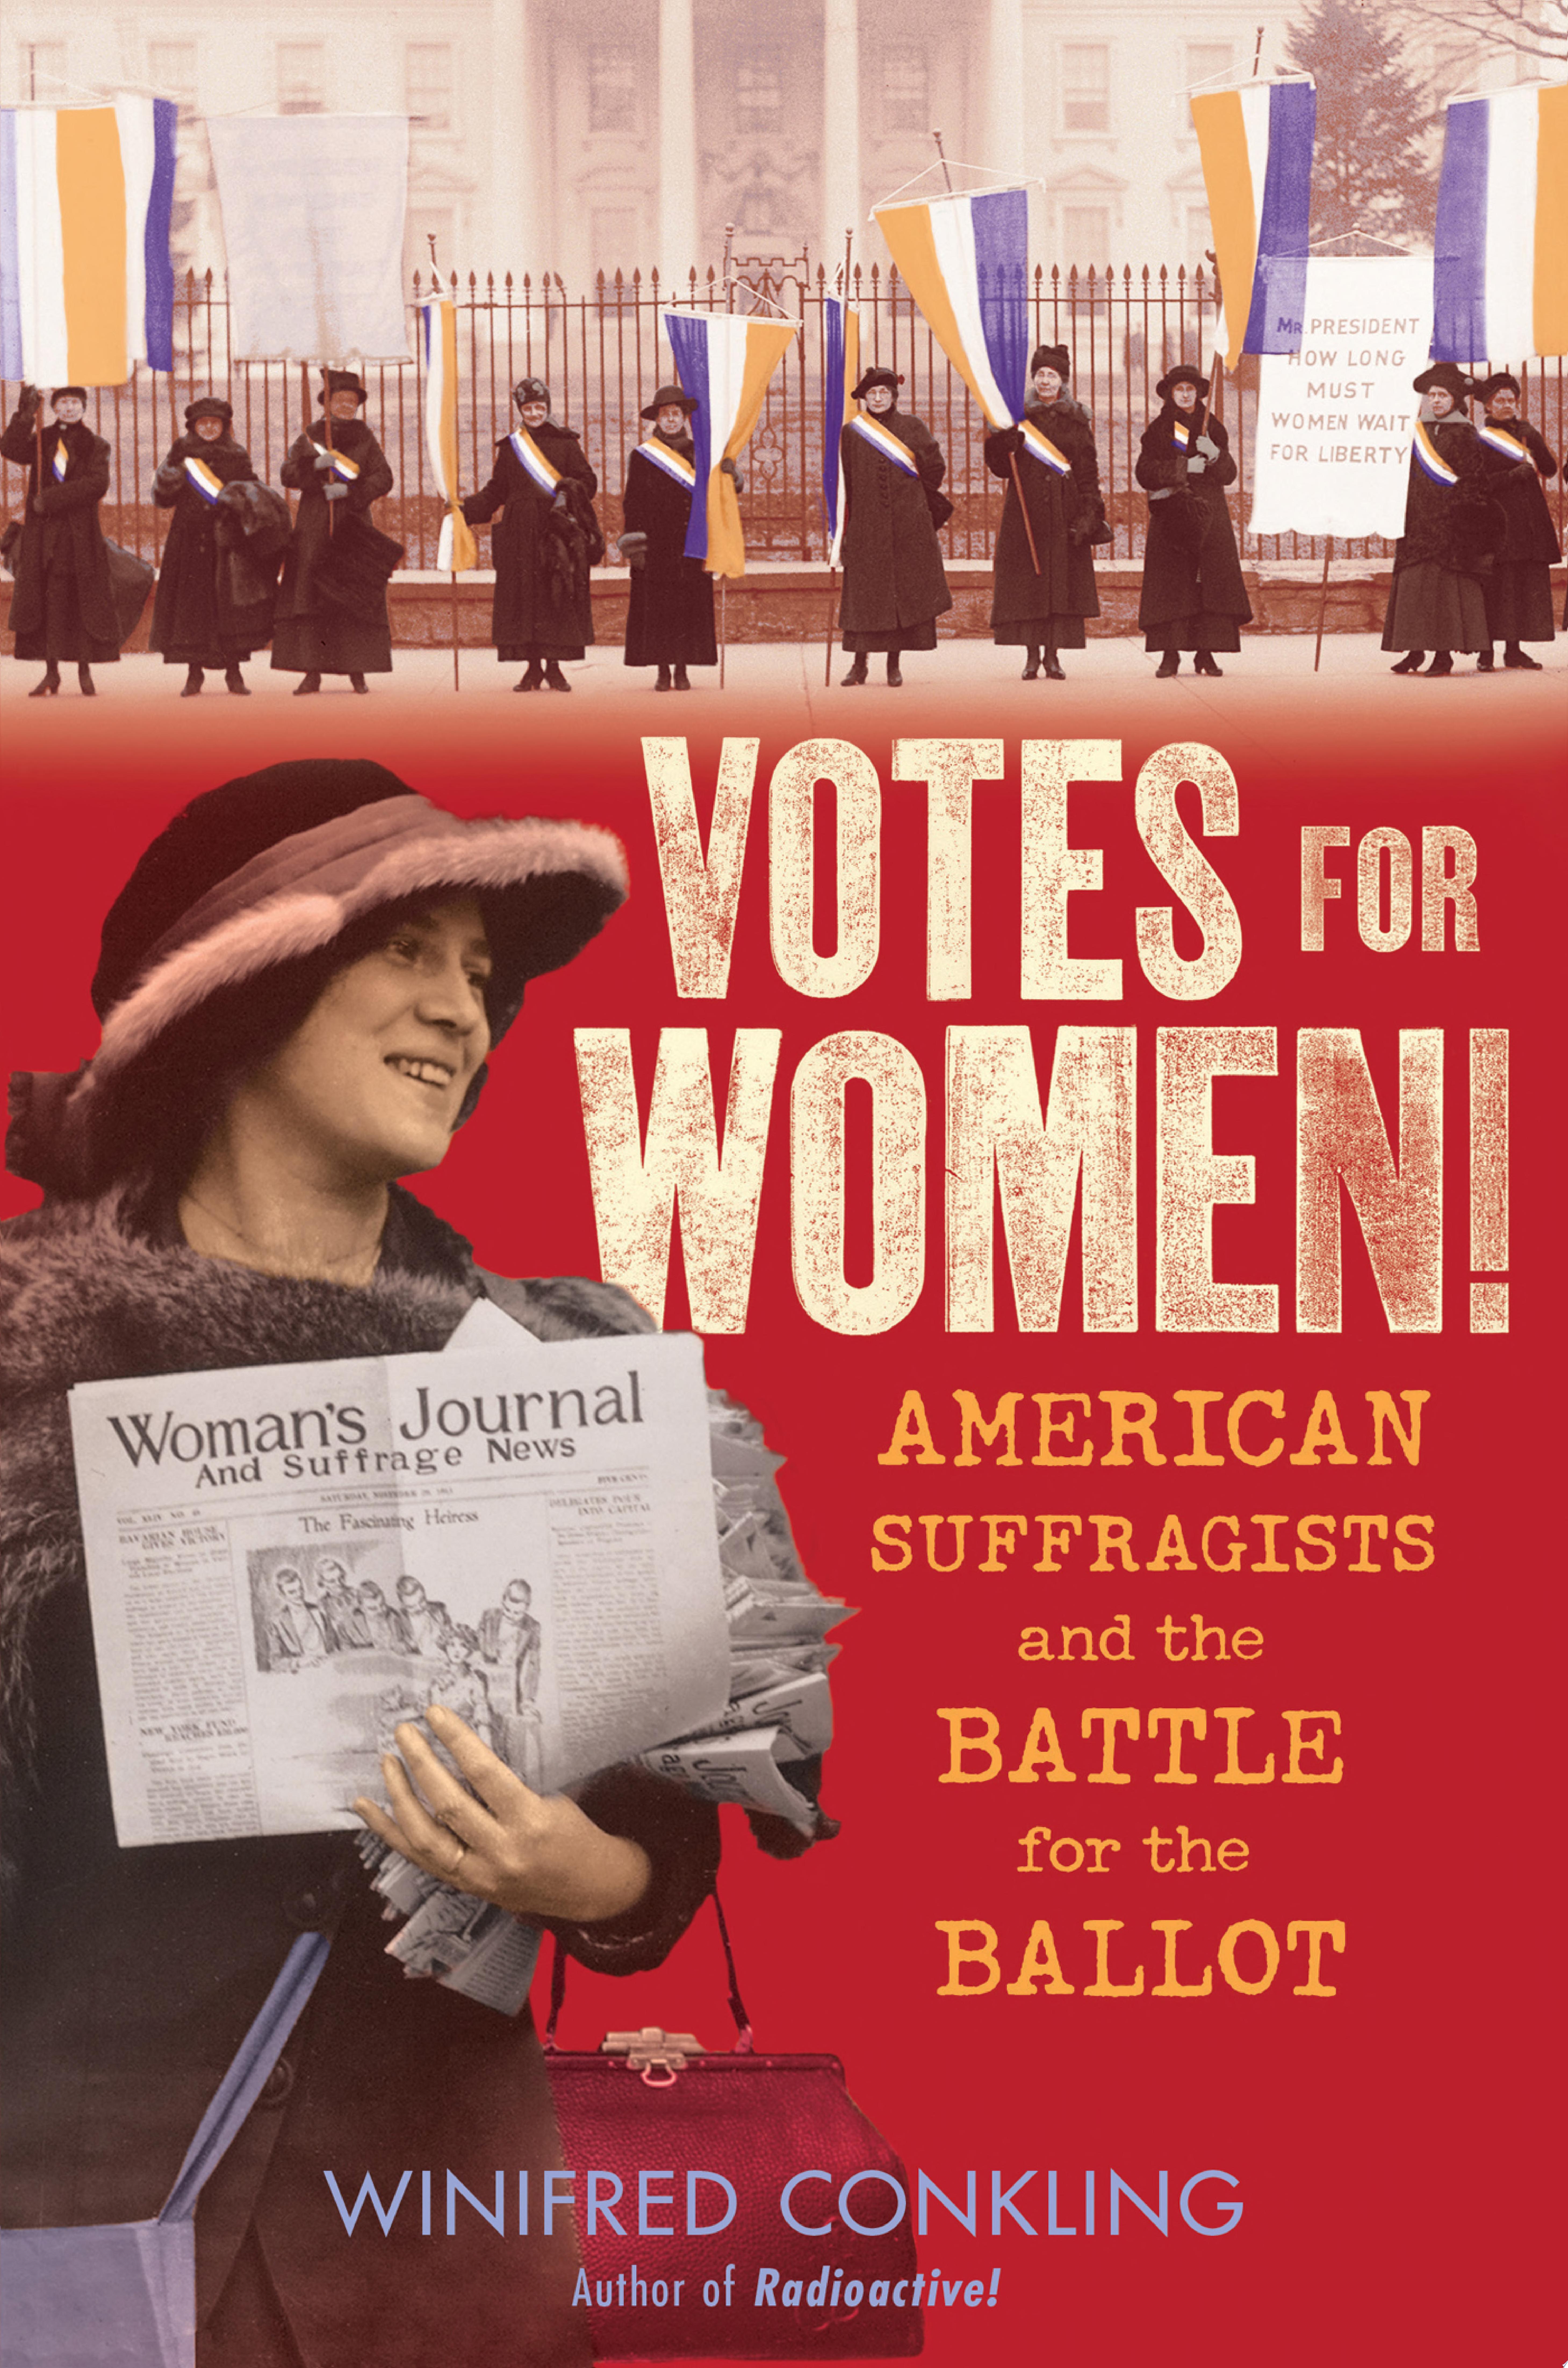 Image for "Votes for Women!"